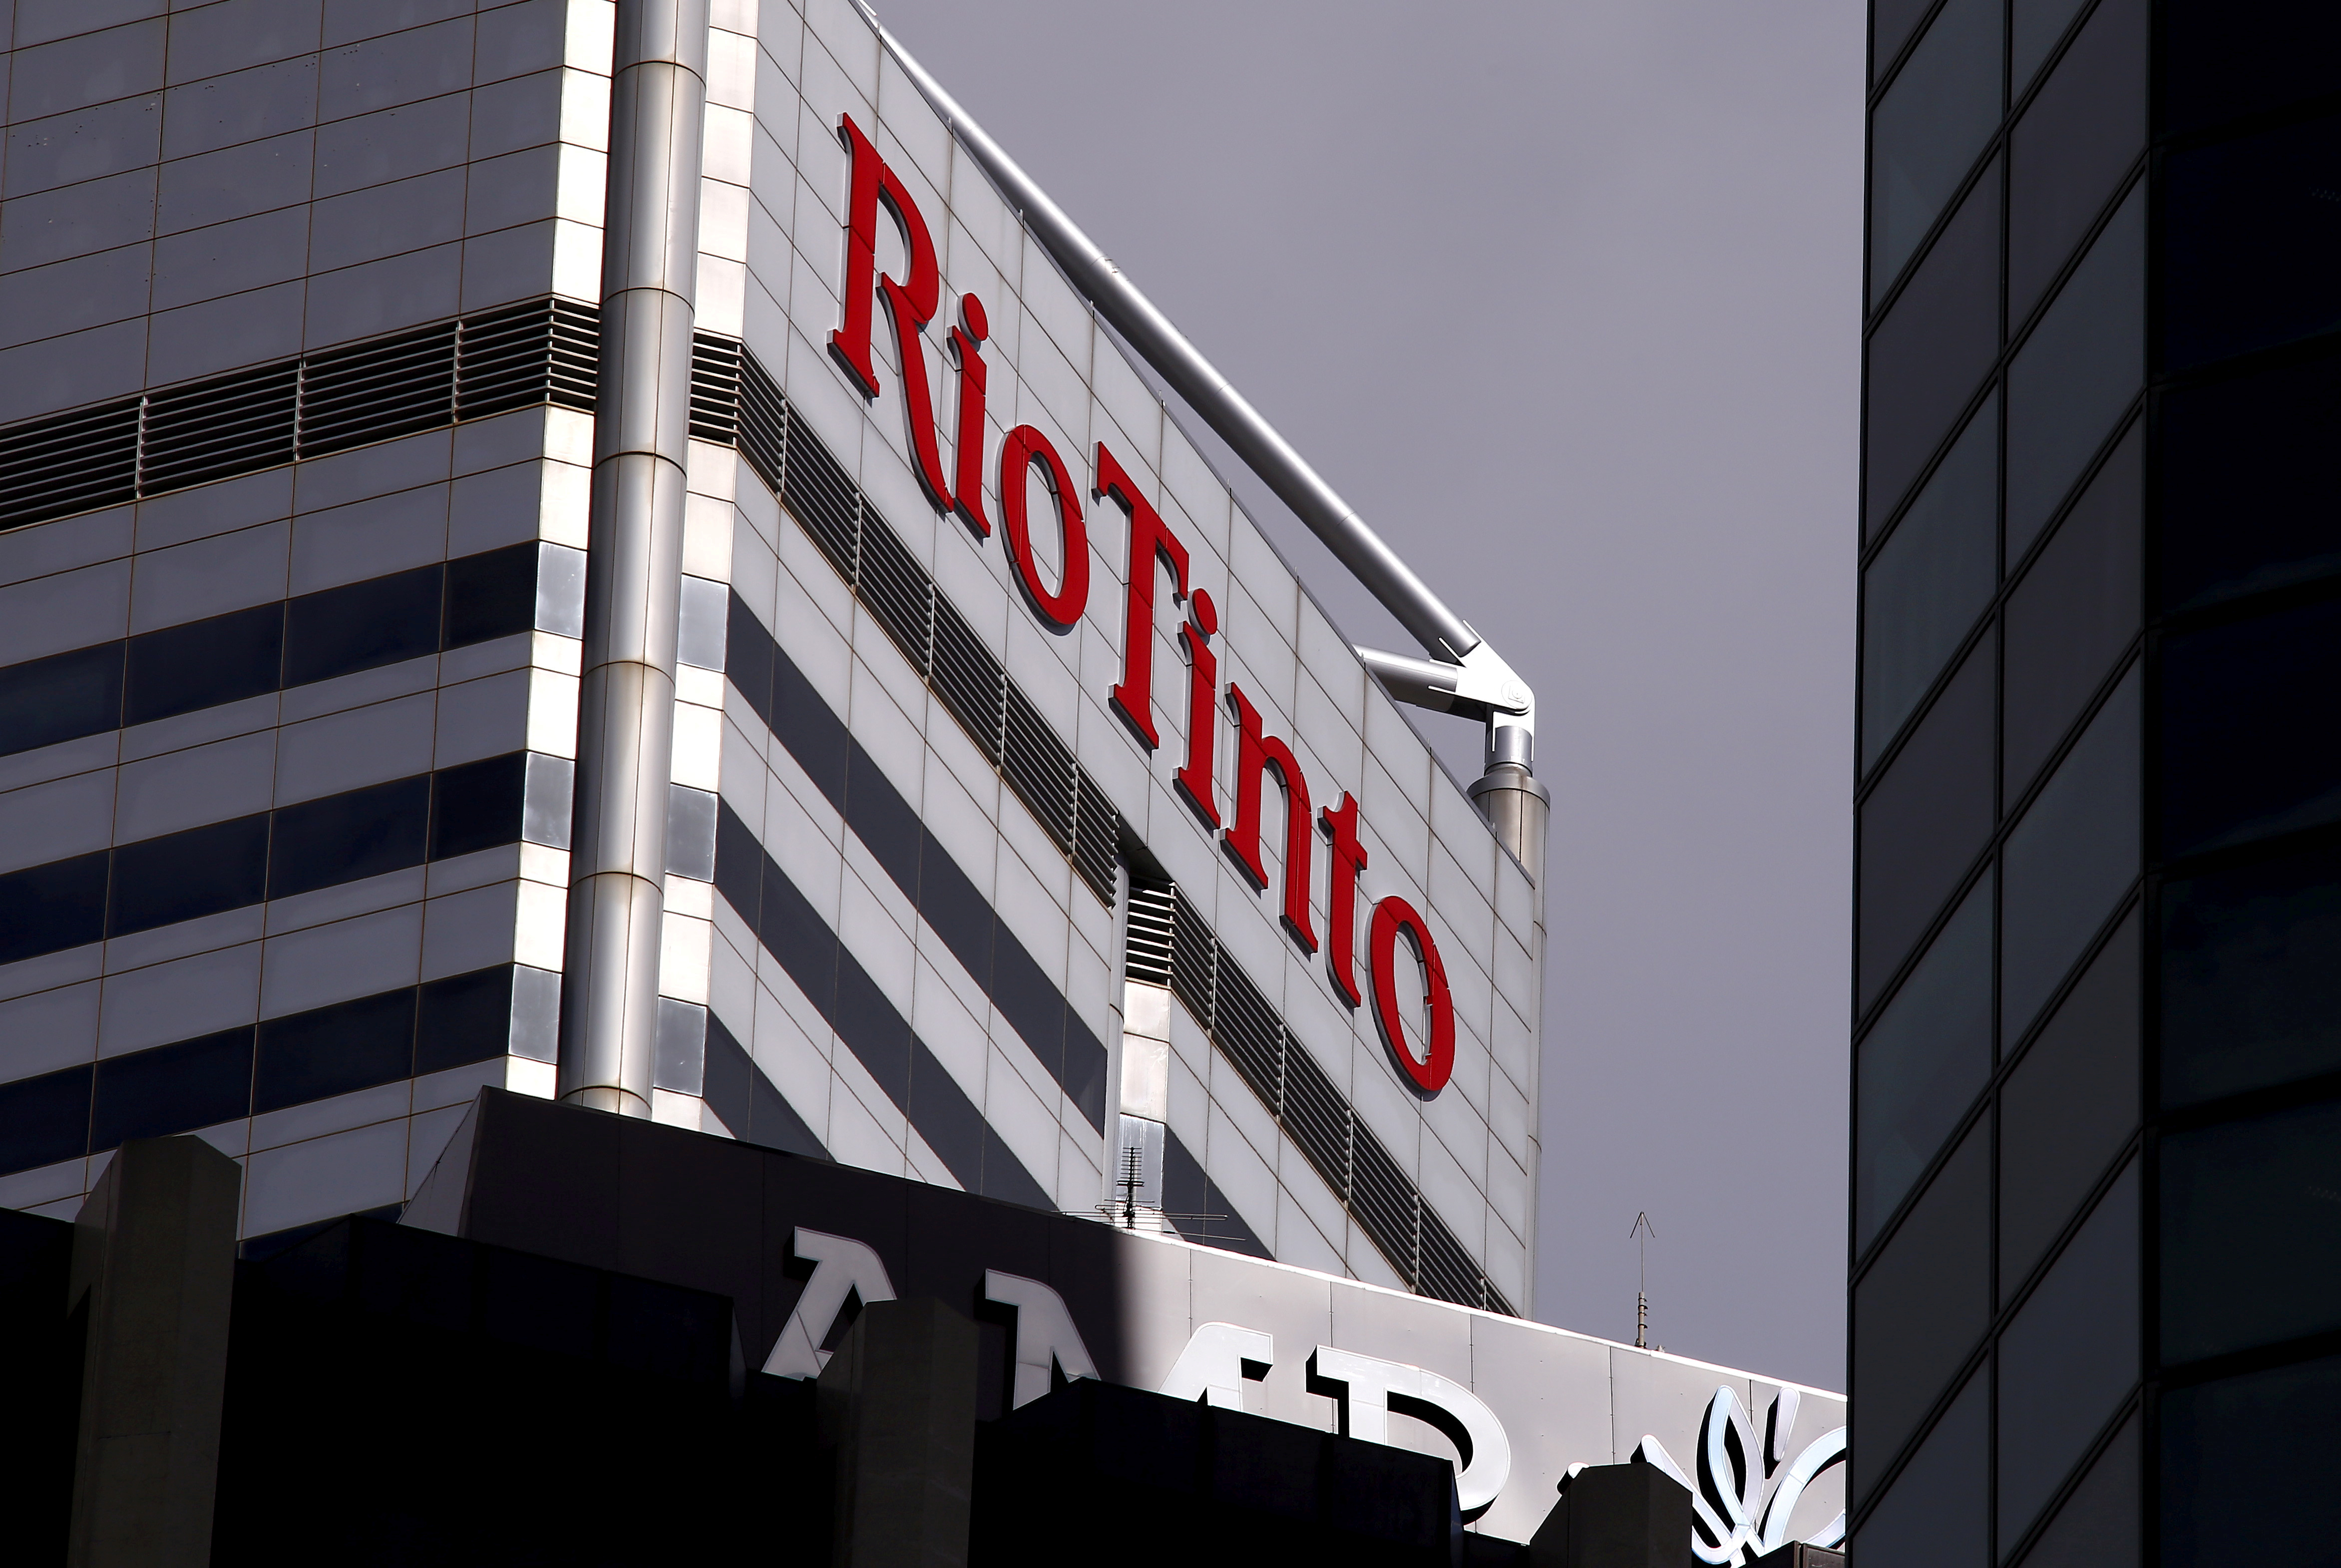 A sign adorns the building where mining company Rio Tinto has their office in Perth, Western Australia, November 19, 2015. REUTERS/David Gray